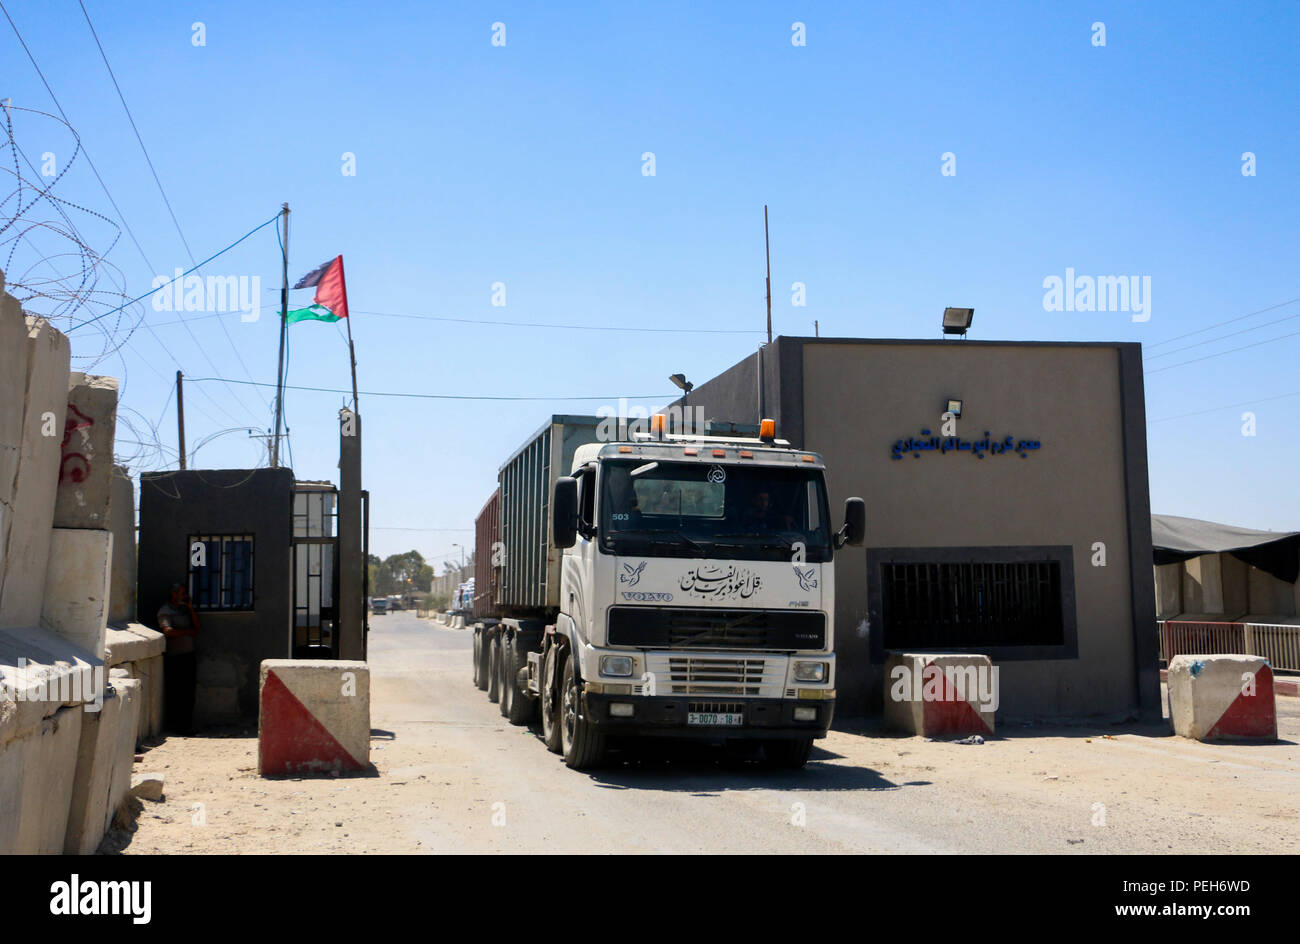 August 15, 2018 - Trucks carrying commercial goods enter Gaza through the Kerem Shalom crossing in Rafah, in the southern Gaza Strip, as Israel reopens the Kerem Salam crossing after nearly a month of closure. Israel had closed the crossing and suspended the import of fuel and gas on the besieged Gaza strip as punishing measures against the launch by Palestinians of incendiary balloons and kites from the strip into southern Israel. Of the two crossings into Gaza controlled by Israel, the Erez crossing in the northern Gaza Strip is specifically for pedestrians, while the Kerem Shalom crossing i Stock Photo